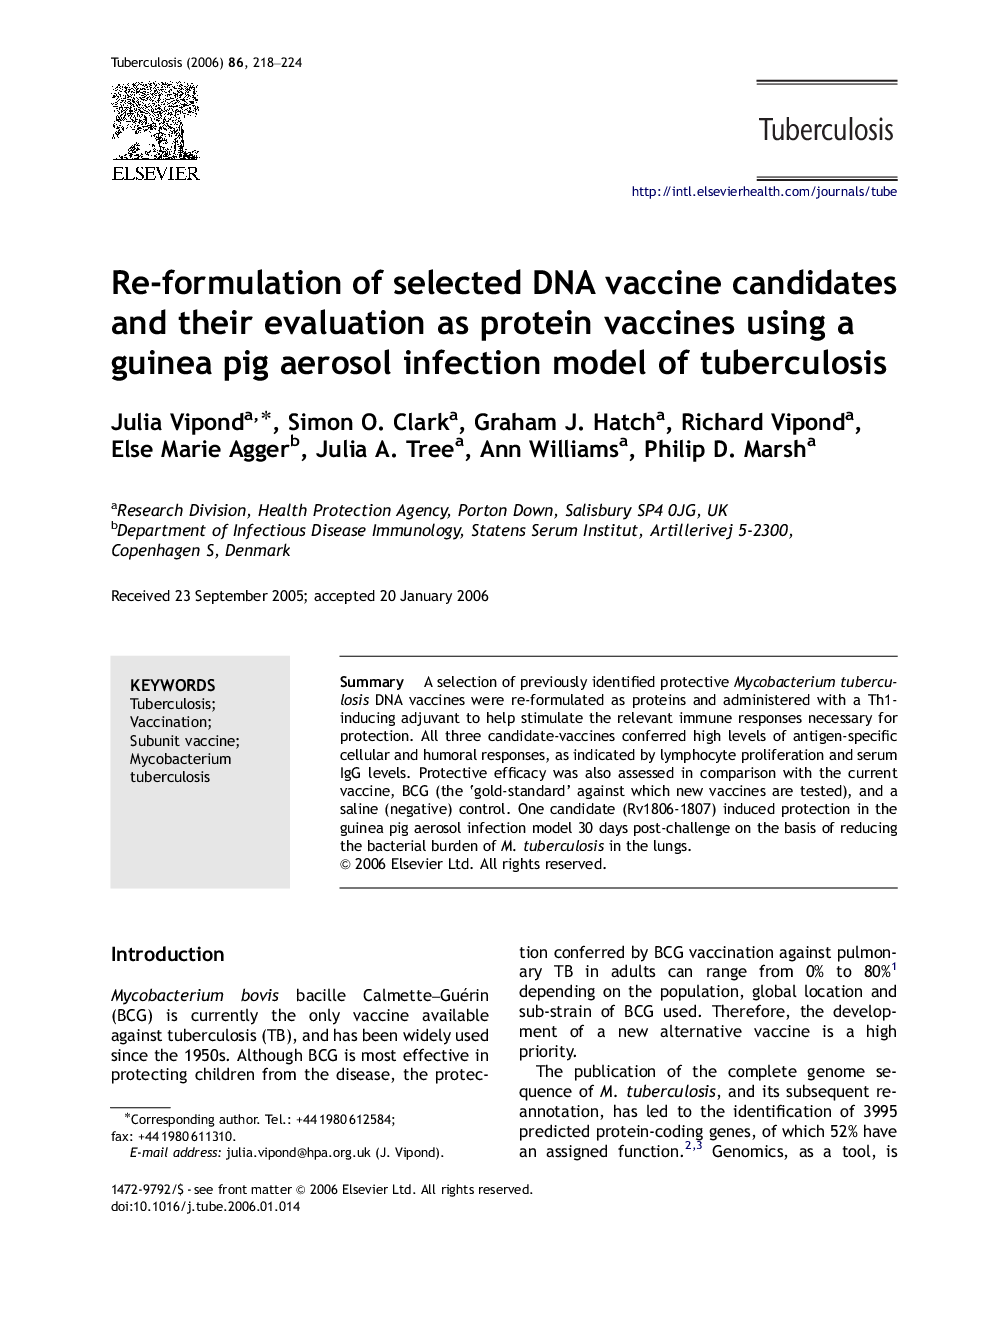 Re-formulation of selected DNA vaccine candidates and their evaluation as protein vaccines using a guinea pig aerosol infection model of tuberculosis